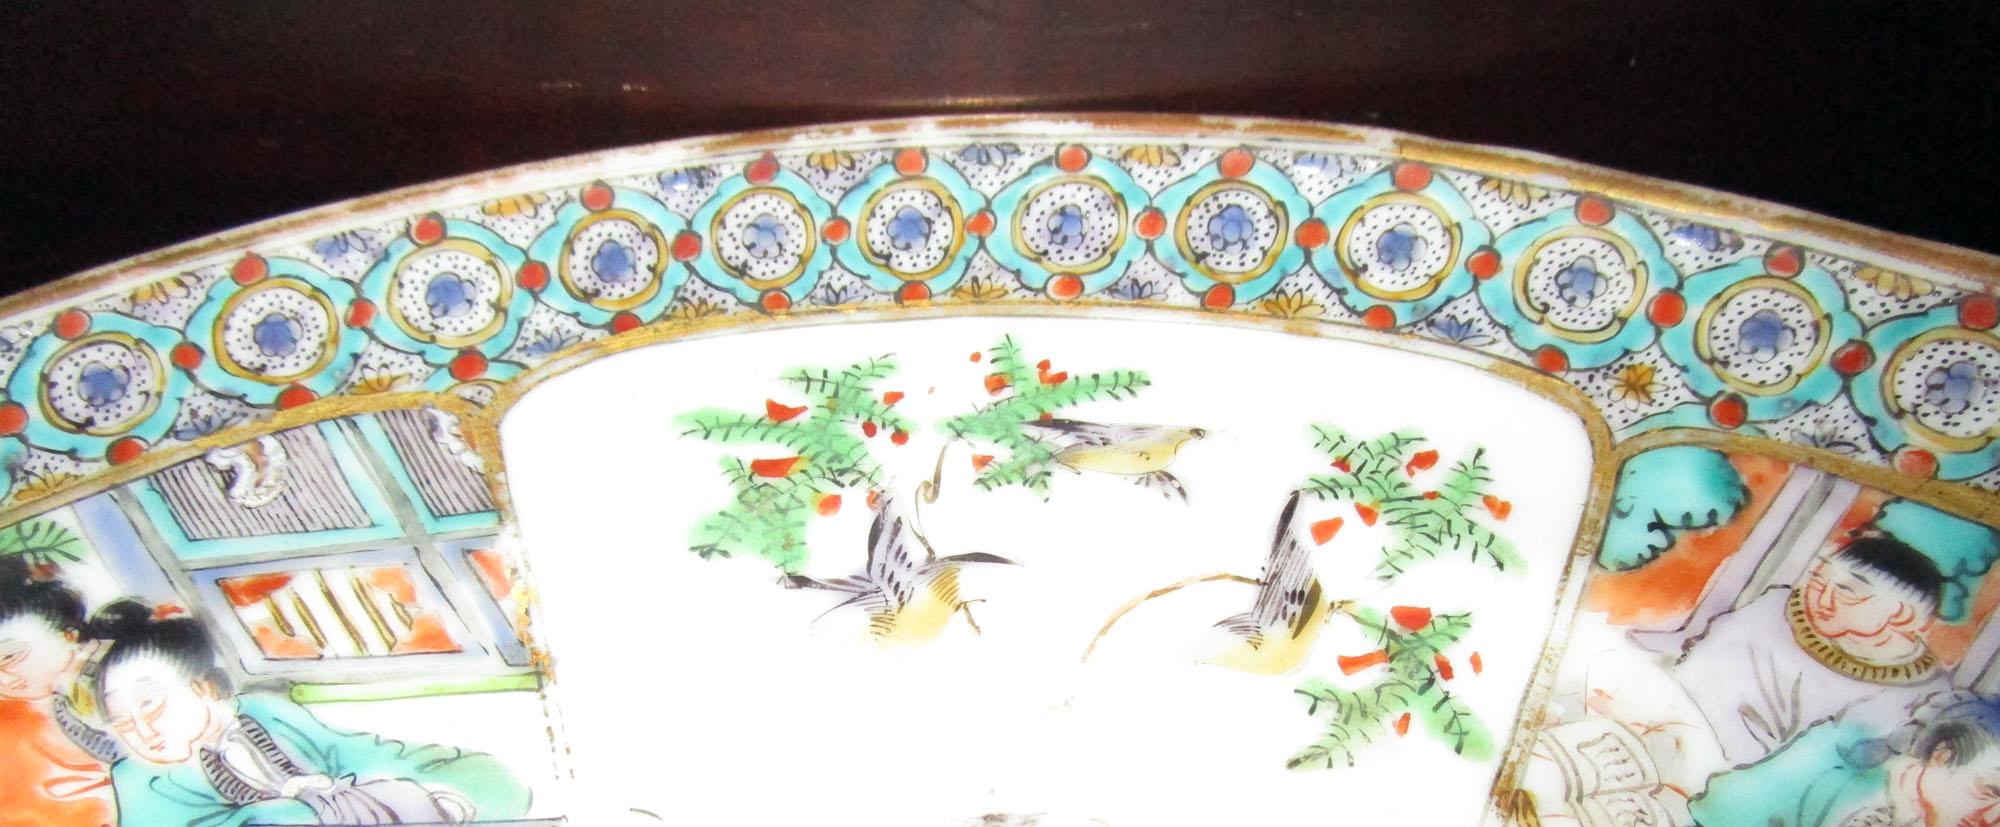 Painted 19th century Rose Medallion Chinese Export Plate Set of Two